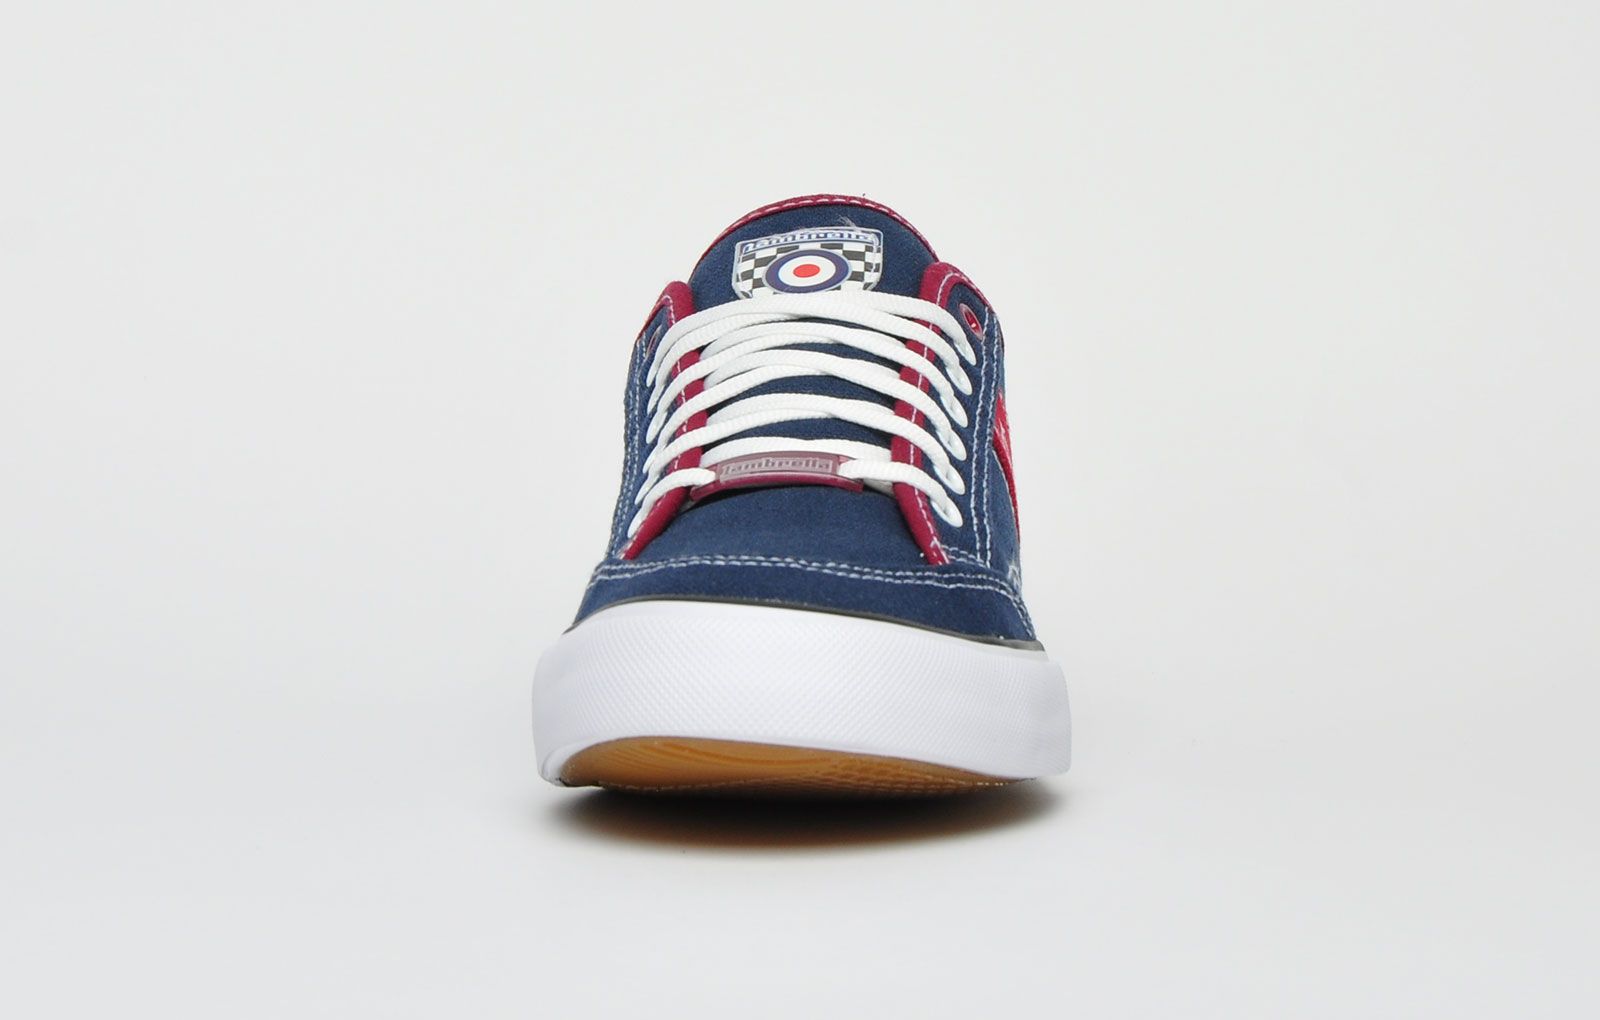 <p>Brighten up your trainer collection with the Lambretta Classic Mexico. Featuring a robust canvas upper with sophisticated detailing throughout, this new twist on the classic Lambretta Mexico court silhouette will make you stand out from the crowd while its classic Lambretta looks deliver street-ready style and comfort for all day wear.</p><br> <p class=